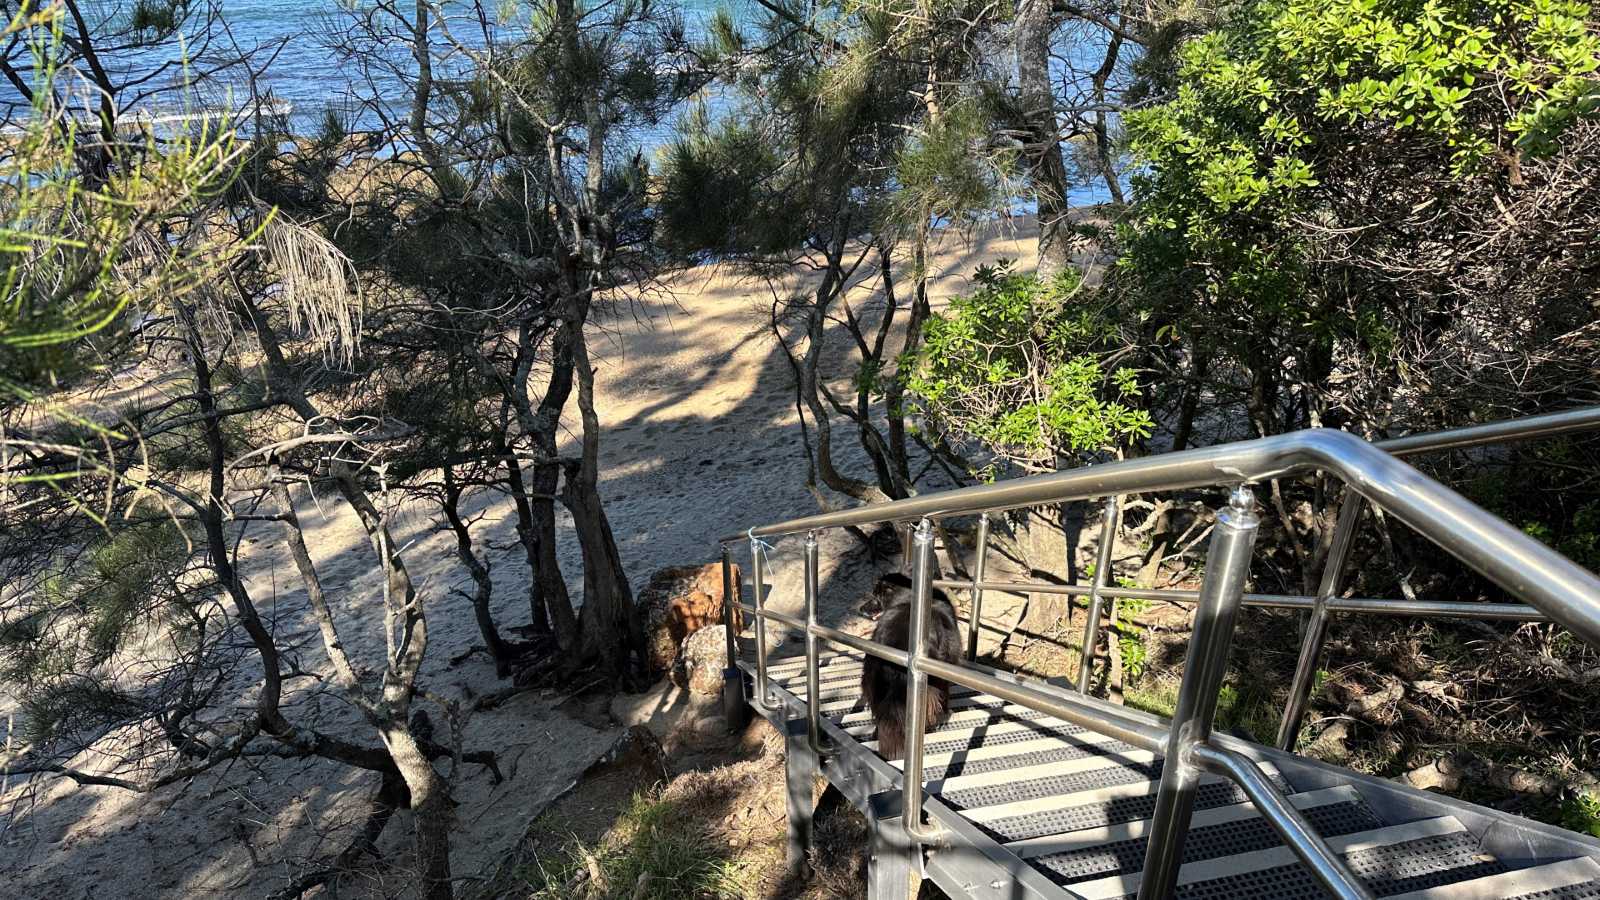 Image A set of stairs with steel handrails leads through vegetation down to a beach.